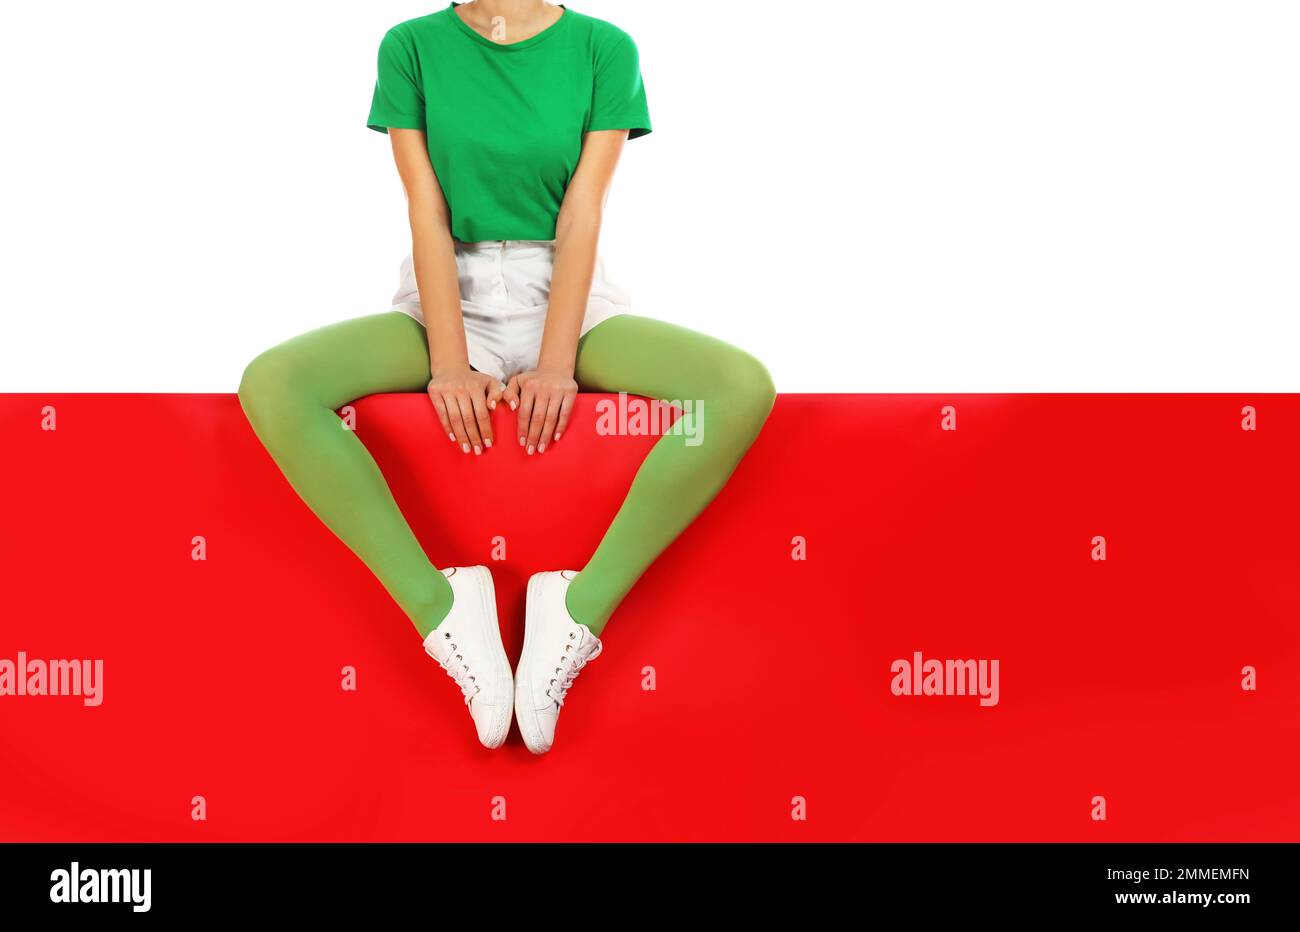 Woman wearing green tights sitting on color background, closeup